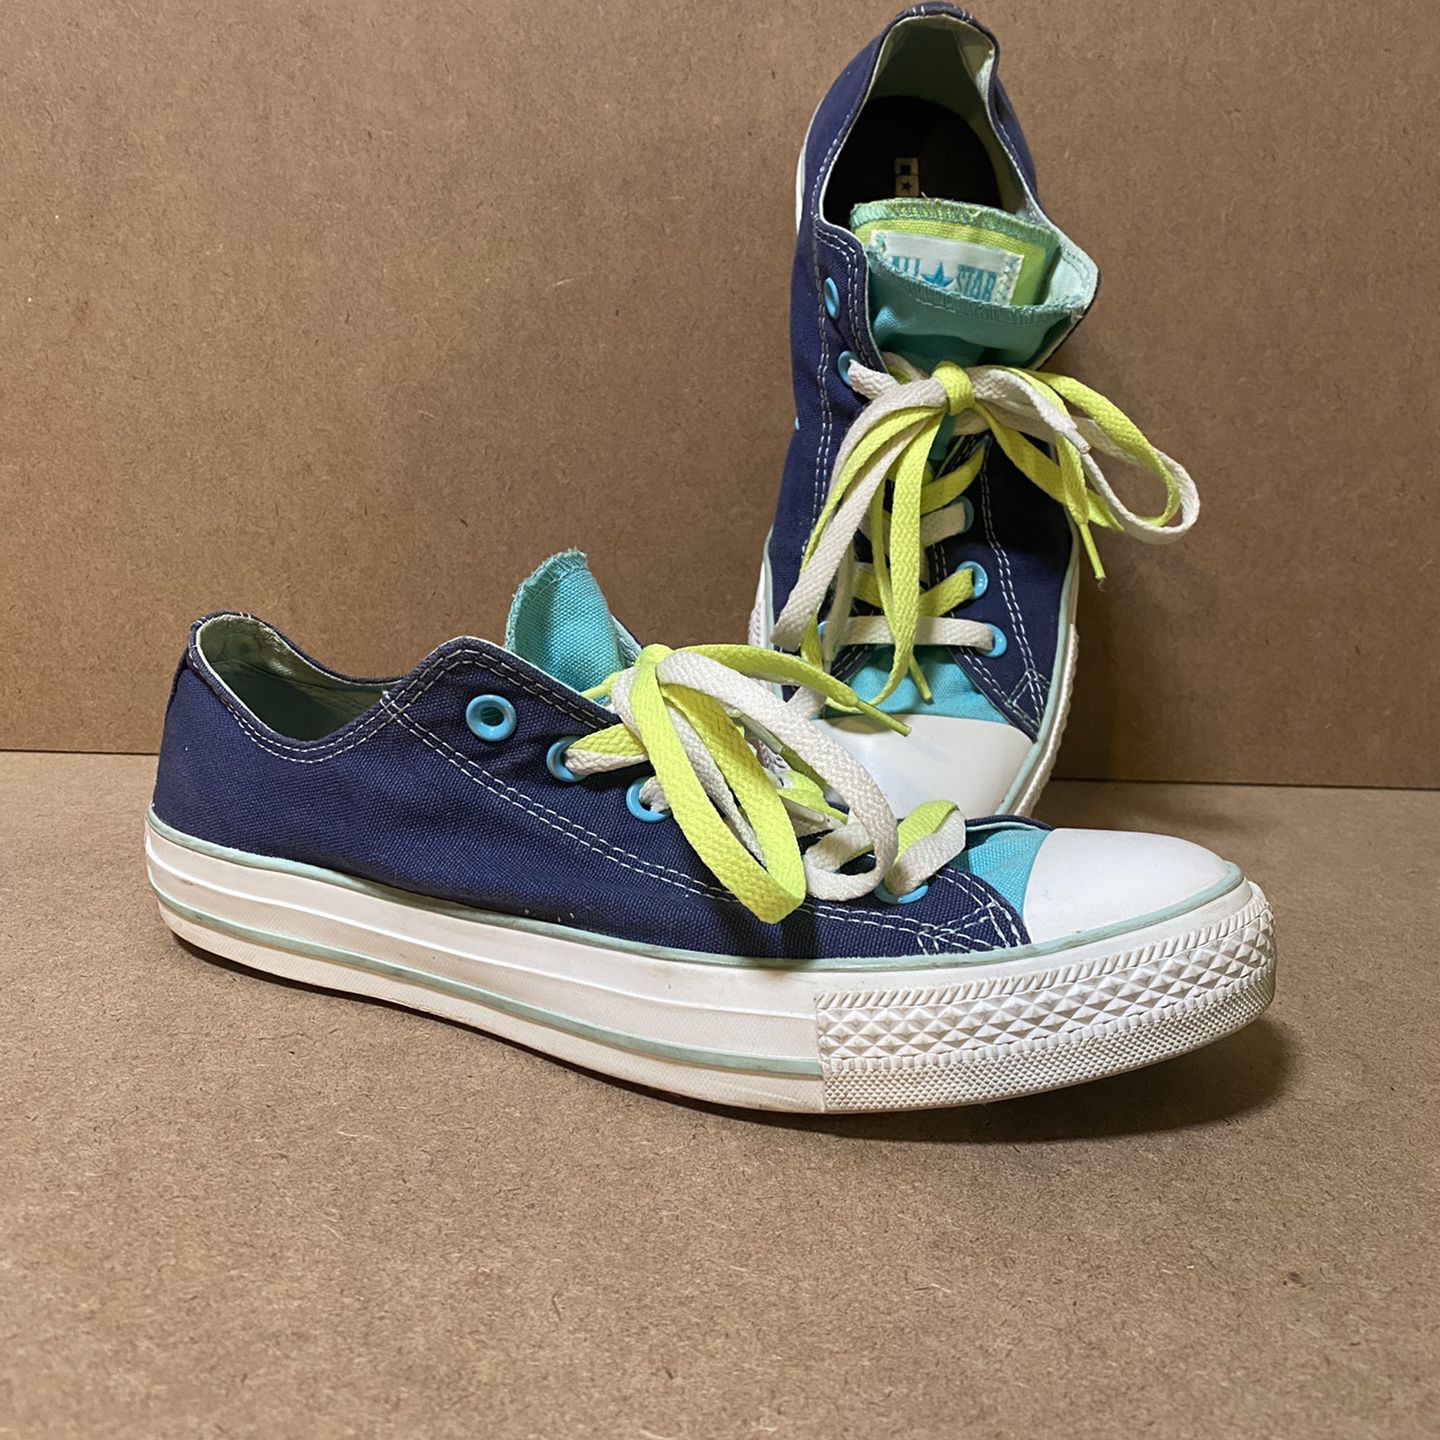 Converse All Star Chuck Taylor Double Tongue Light& neon Colors Unisex Wo’s 10 - Mens 8